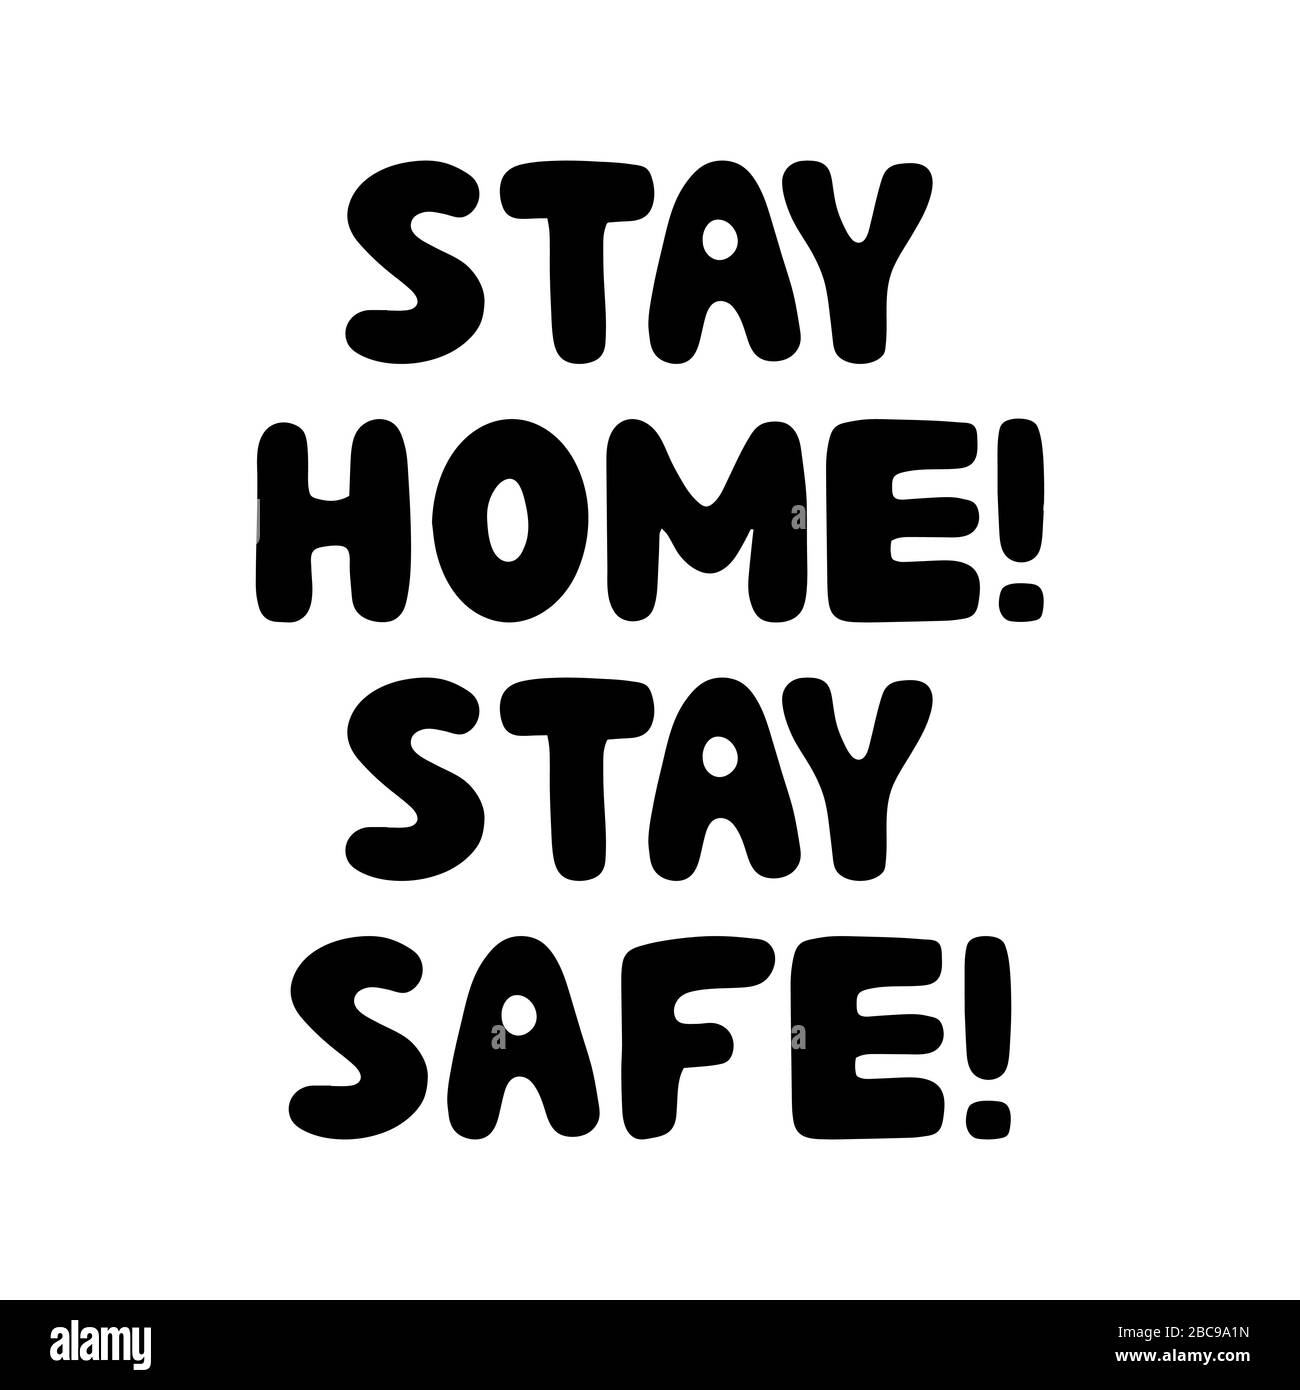 Stay home, Stay safe. Motivational quote. Cute hand drawn bauble lettering. Isolated on white background. Vector stock illustration. Stock Vector